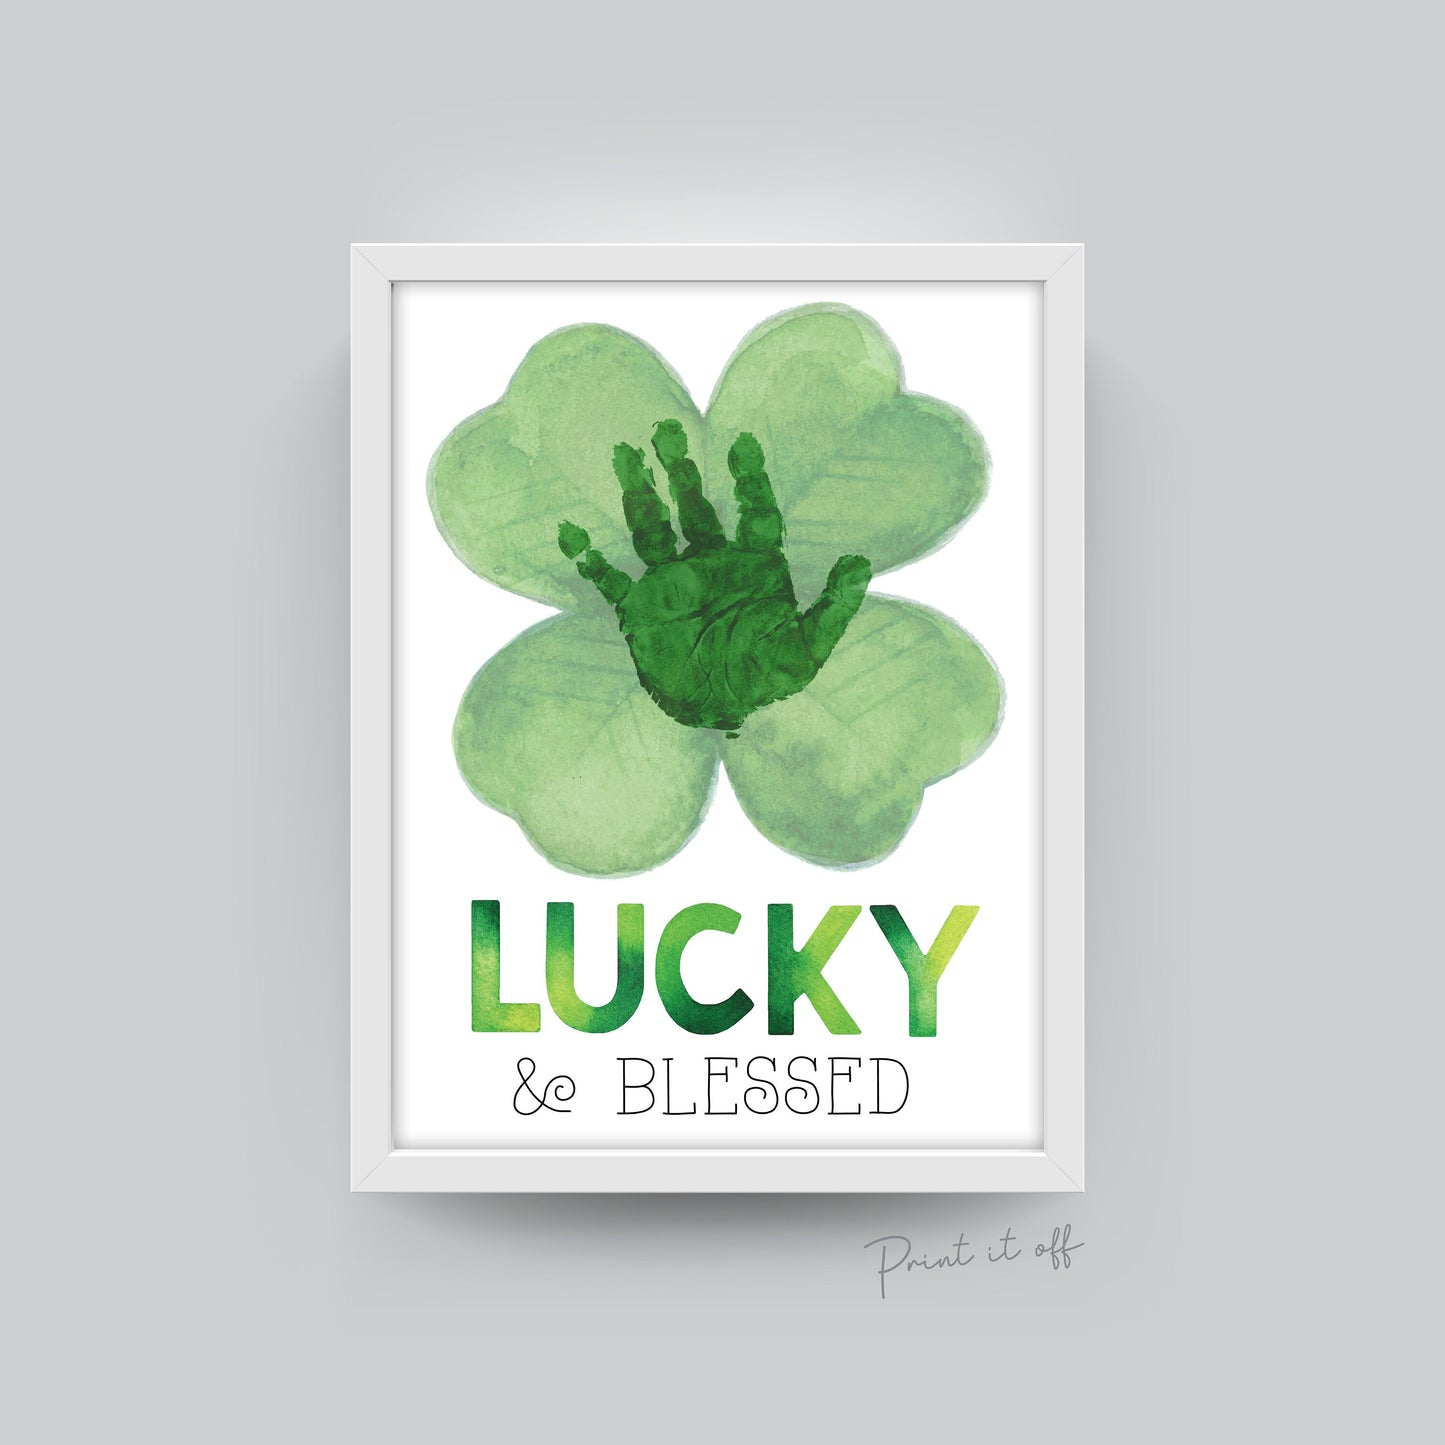 Lucky and Blessed / Handprint Craft / St Patrick's Day Clover / Art Hand Card Activity Sign Decor / Kids Baby Toddler / PRINT IT OFF 0404